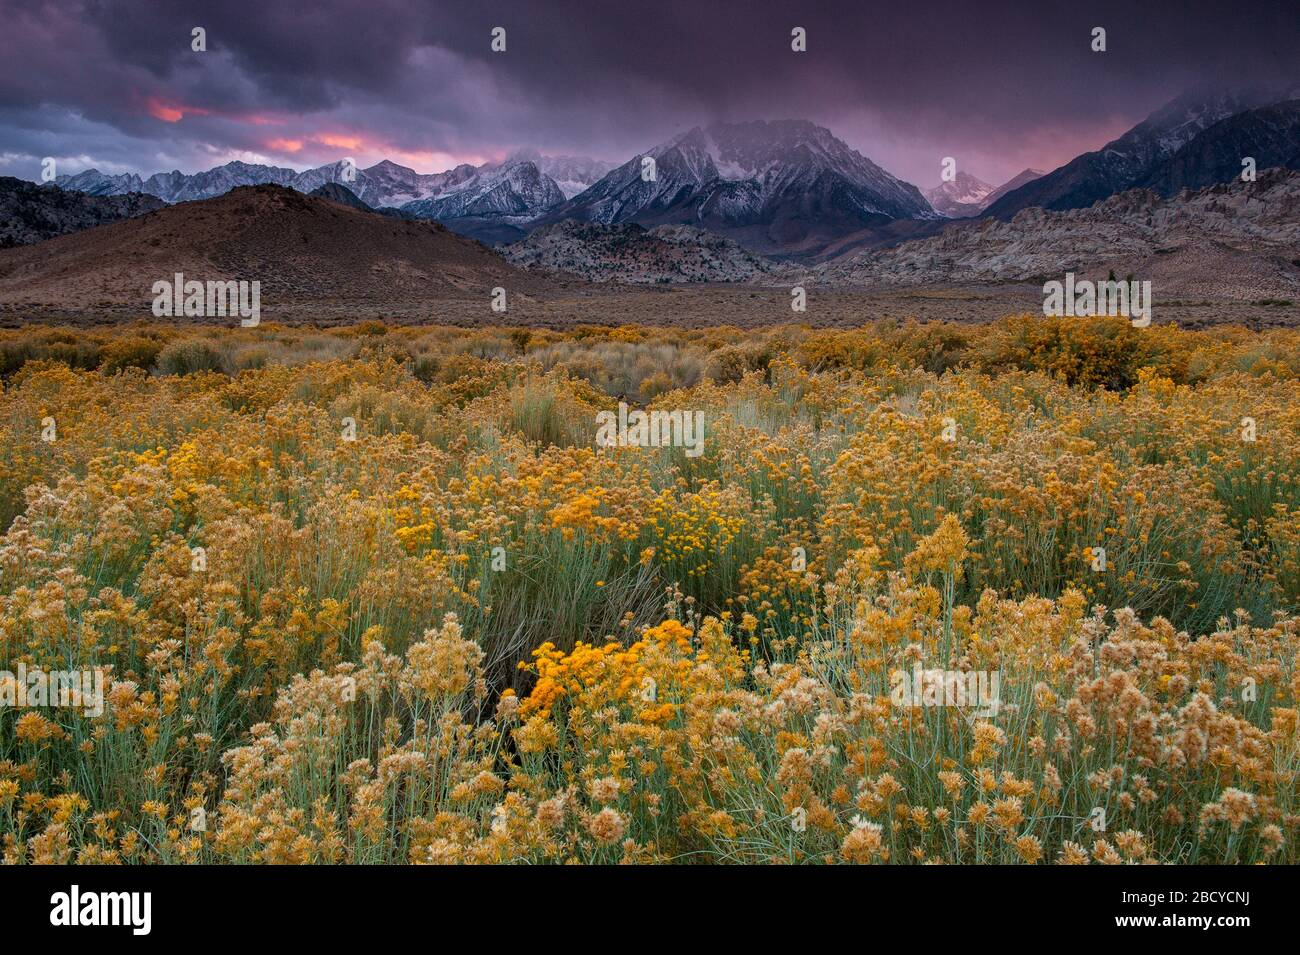 Storm Clouds, Rabbitbrush, The Buttermilks, Mount Humphries, Basin Mountain, Mount Tom, Bishop Creek National Recreation Area, Inyo National Forest, C Stockfoto